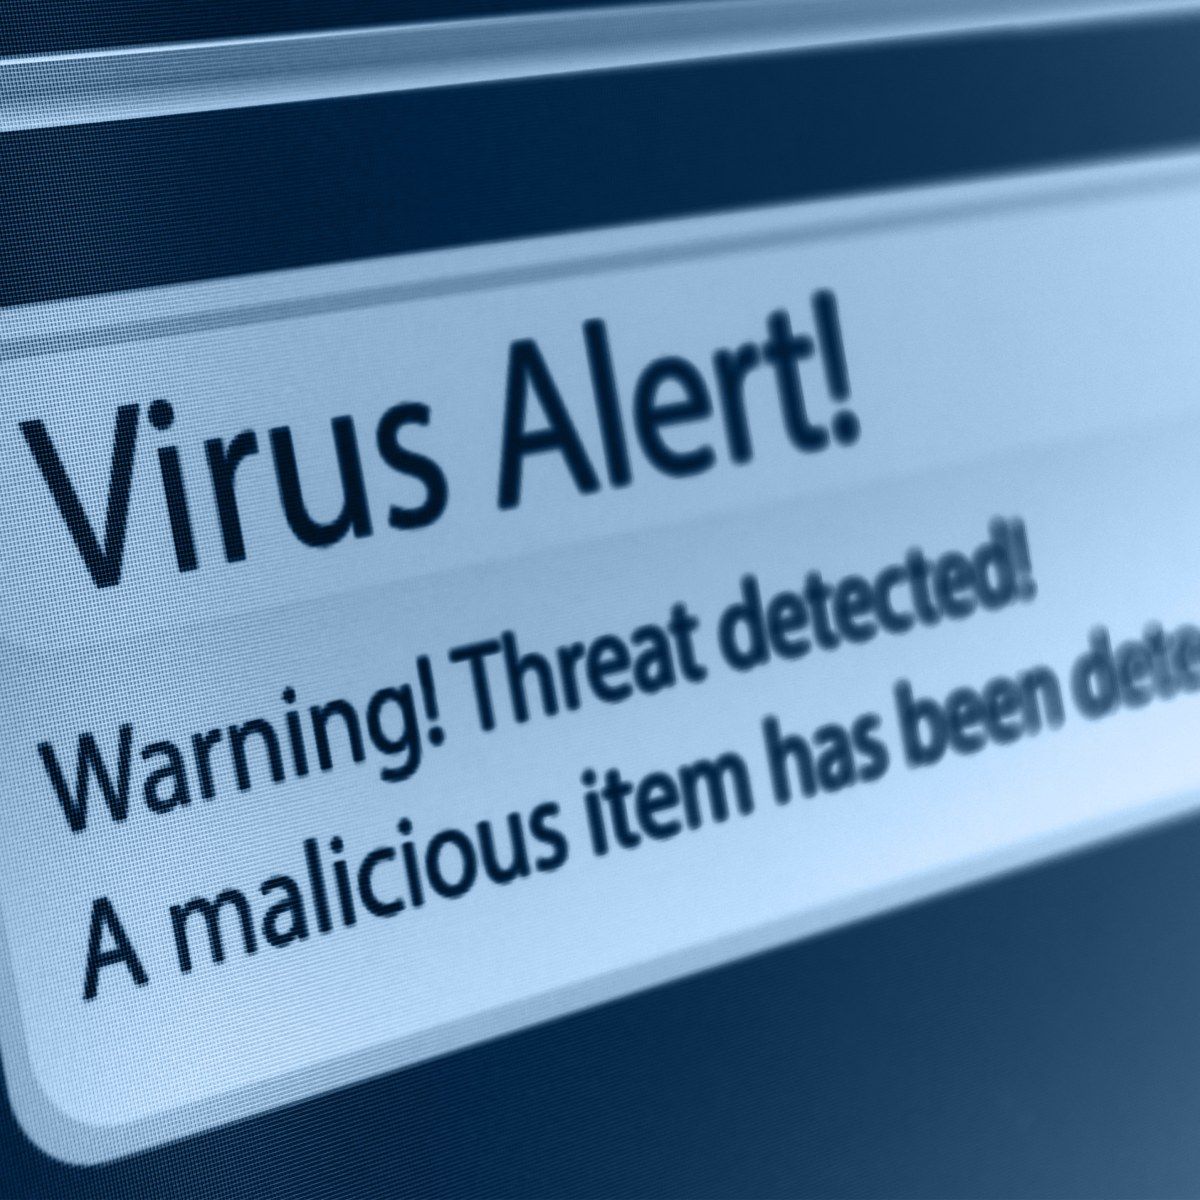 A close-up of a computer screen showing a virus alert that says a threat and malicious item has been detected